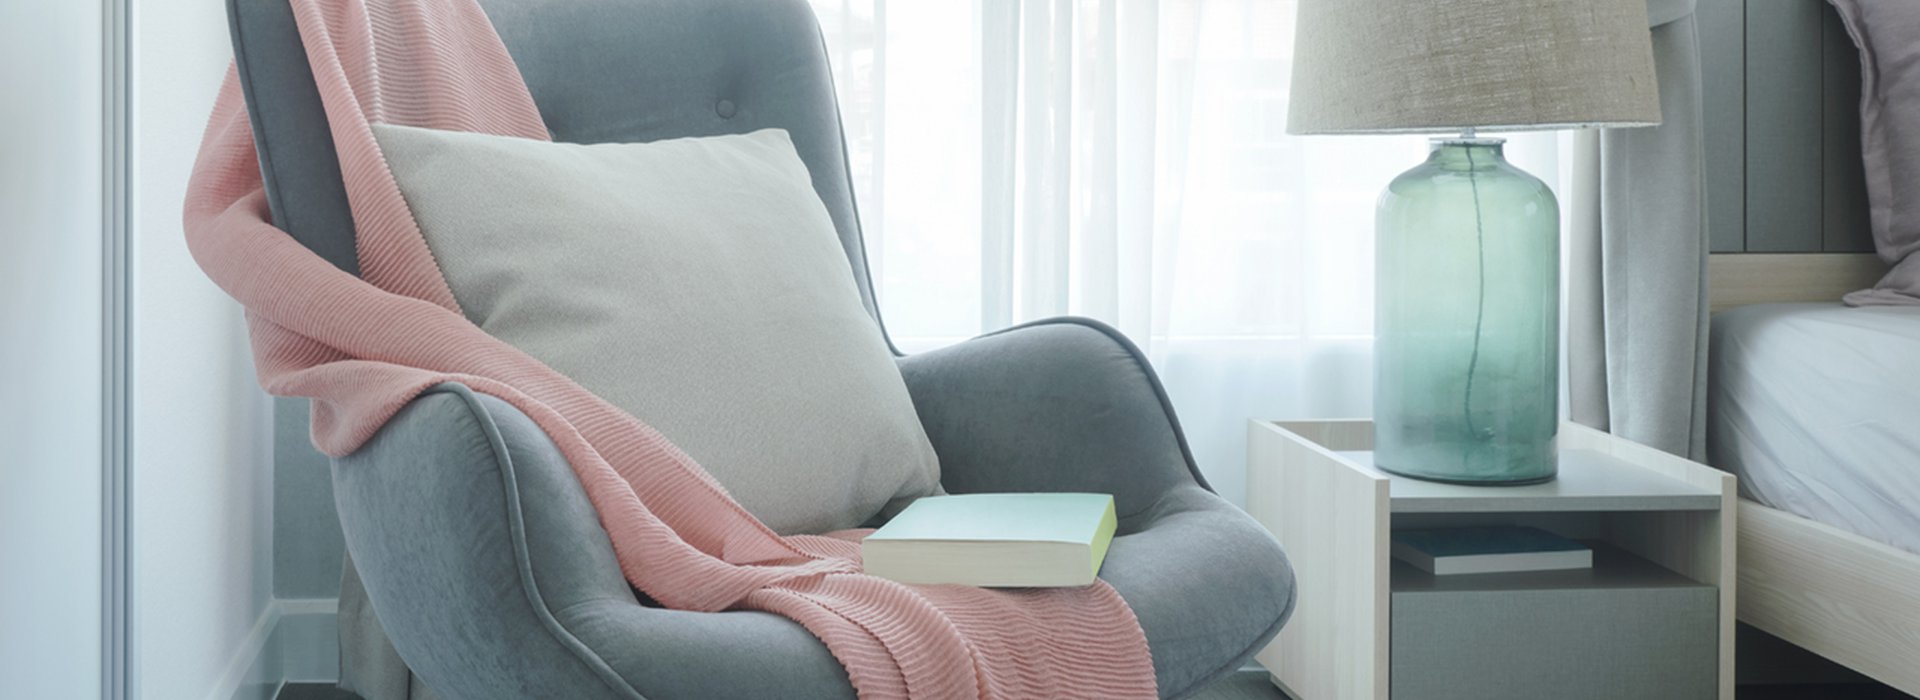 easy-armchair-with-pink-scarf-pillow-and-book-next-to-bed-in-the-bedroom